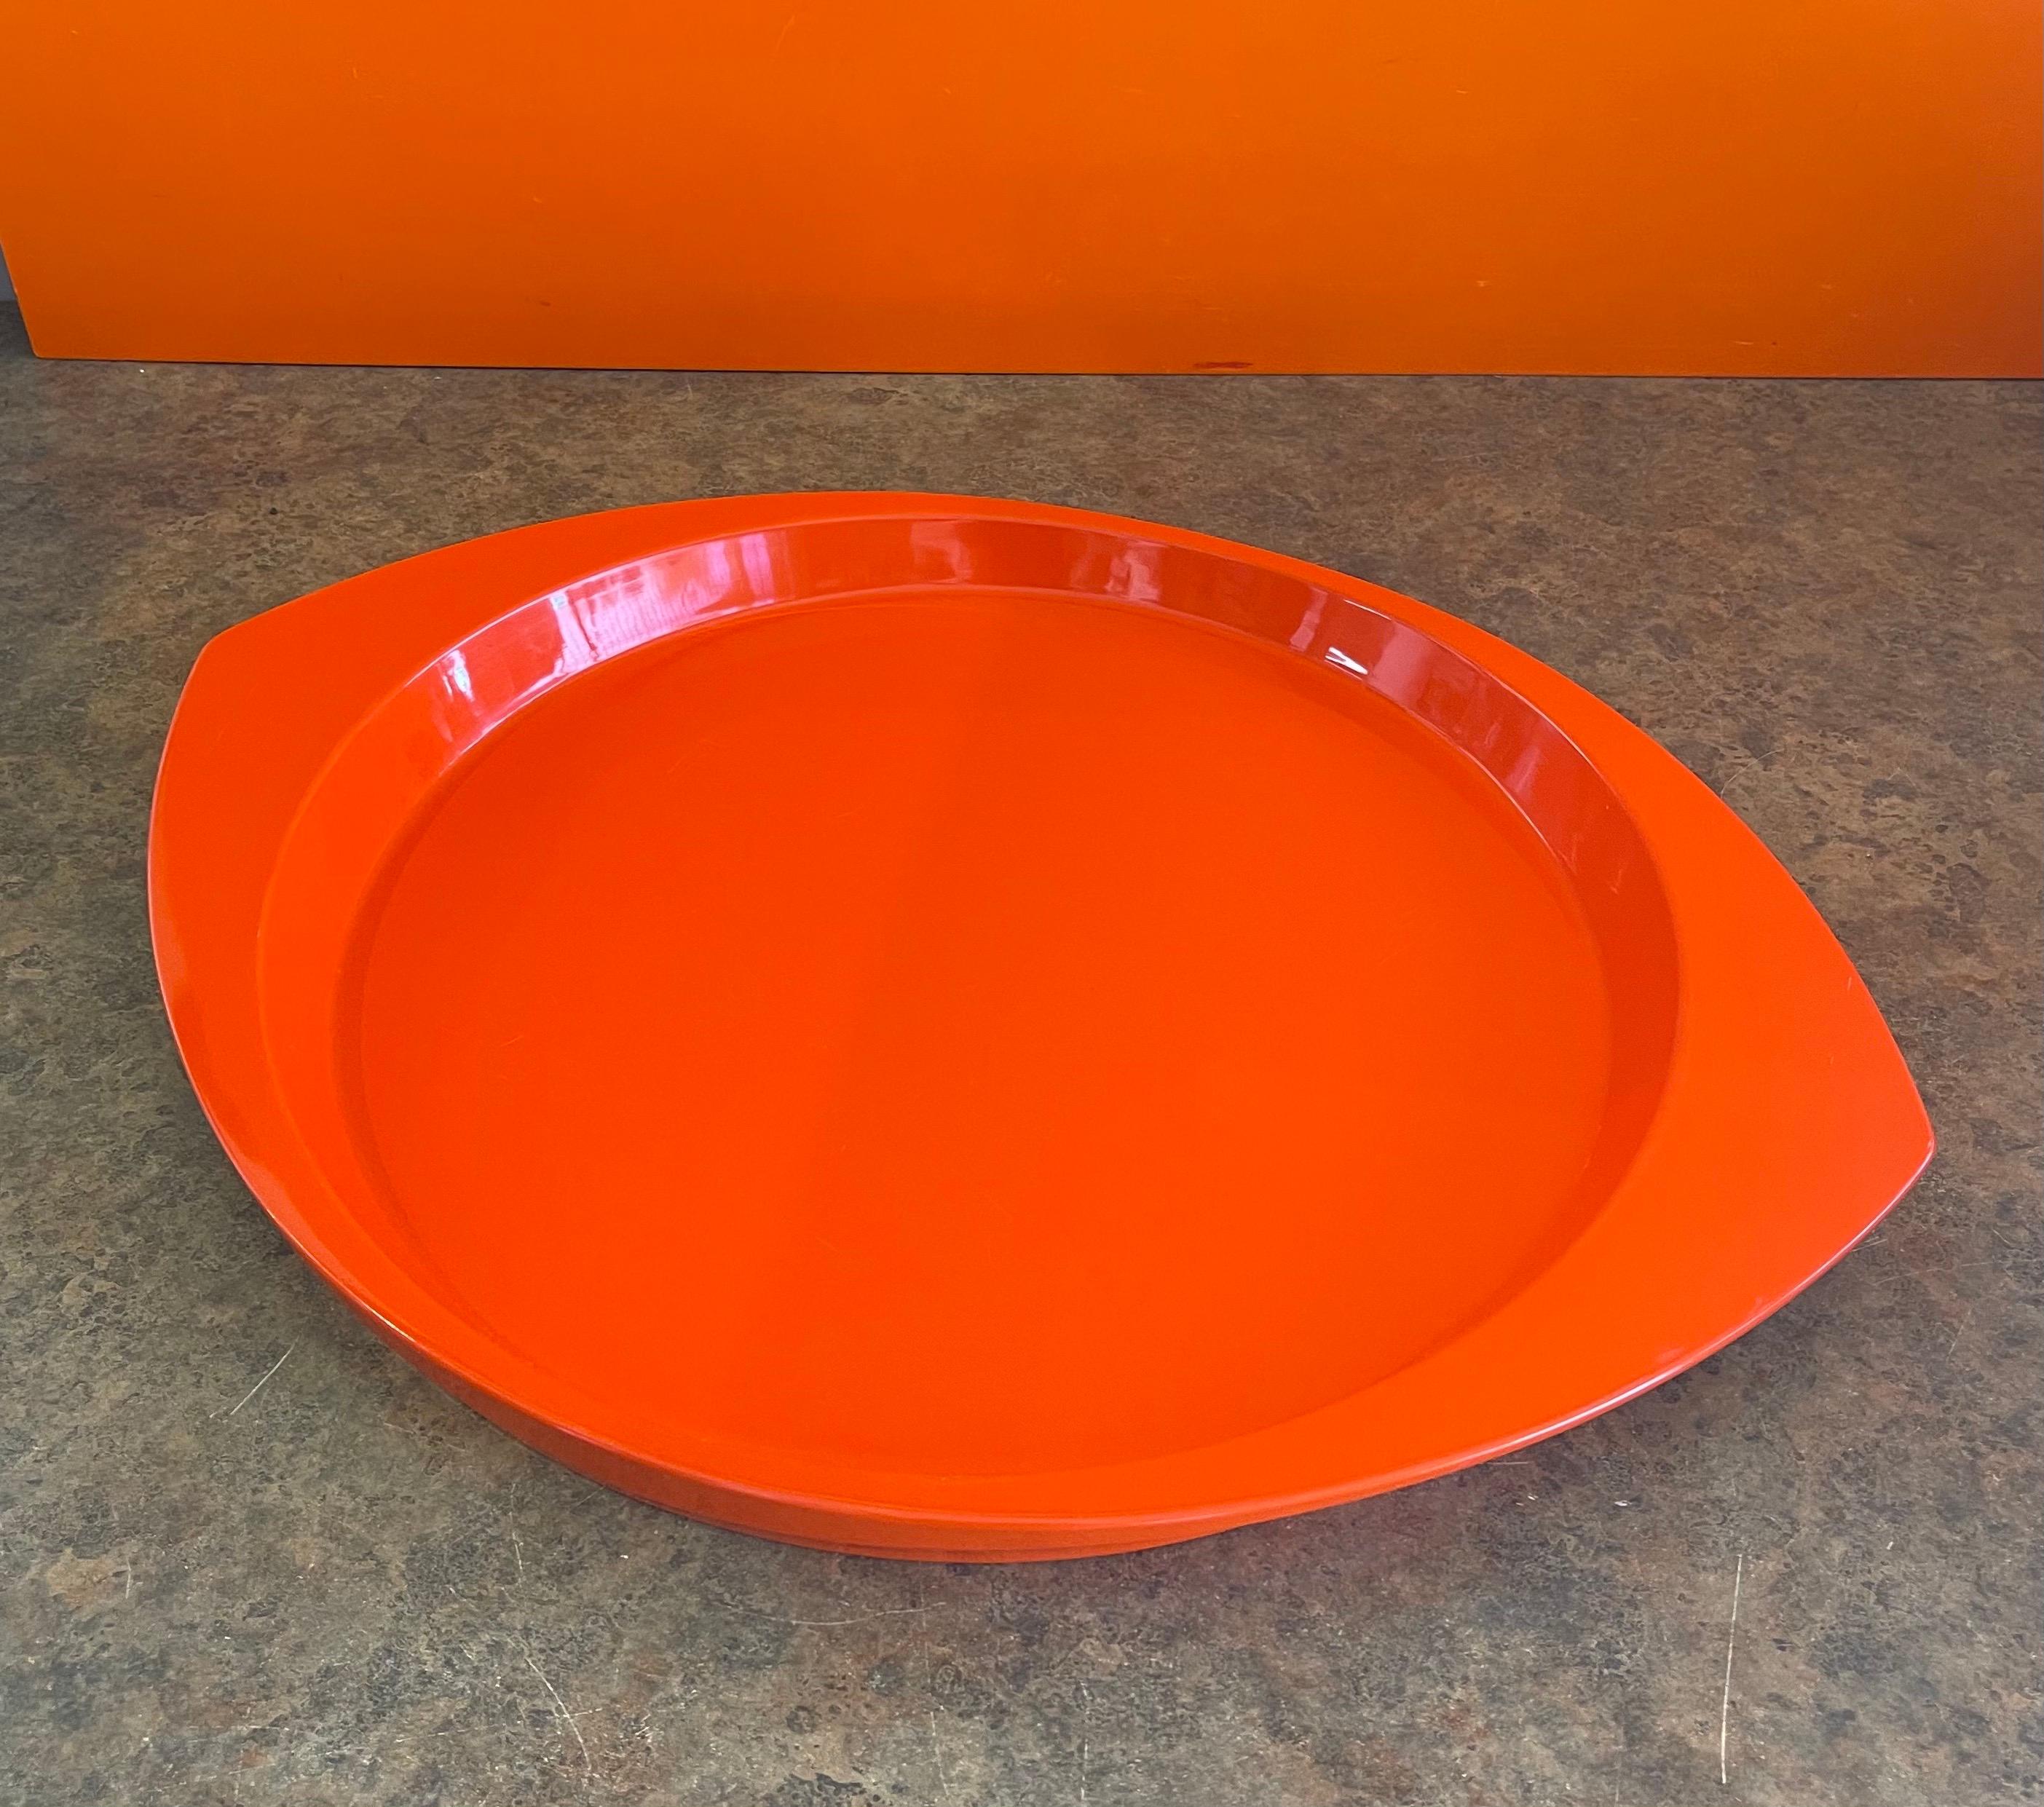 Large Oval Orange Lacquer Tray by Jens Quistgaard for Dansk, Early Production 2